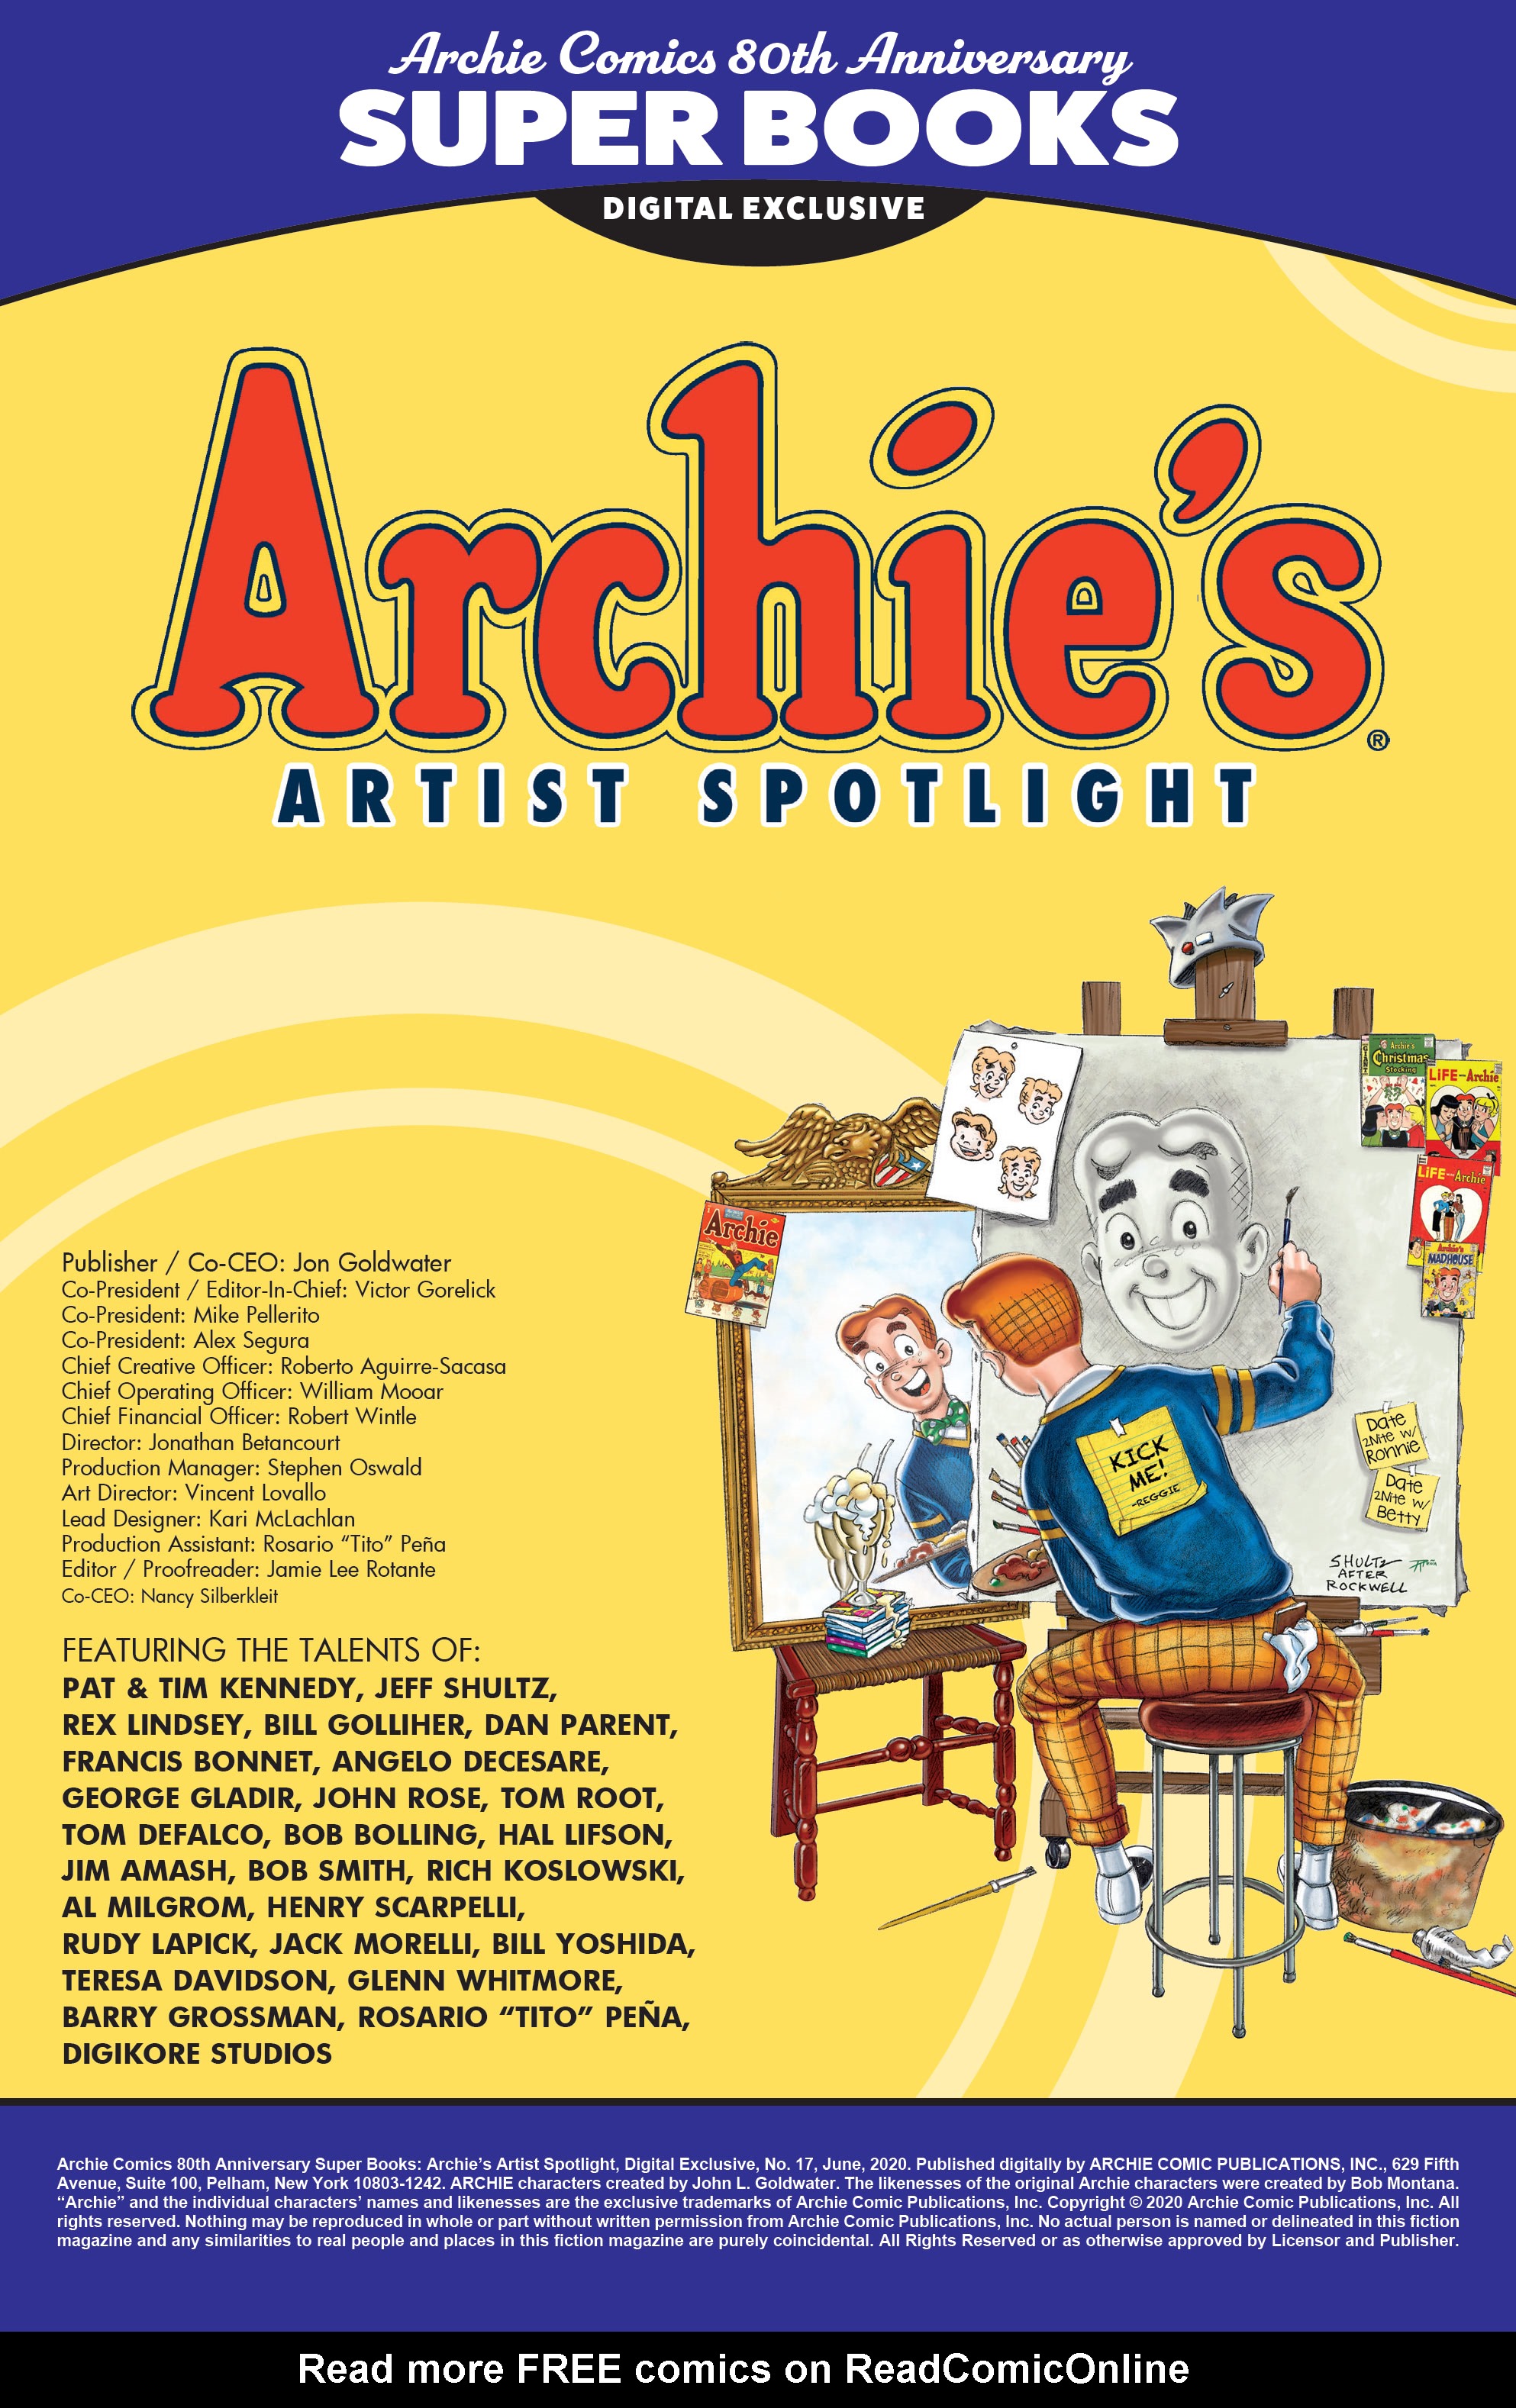 Read online Archie Comics 80th Anniversary Presents comic -  Issue #17 - 2